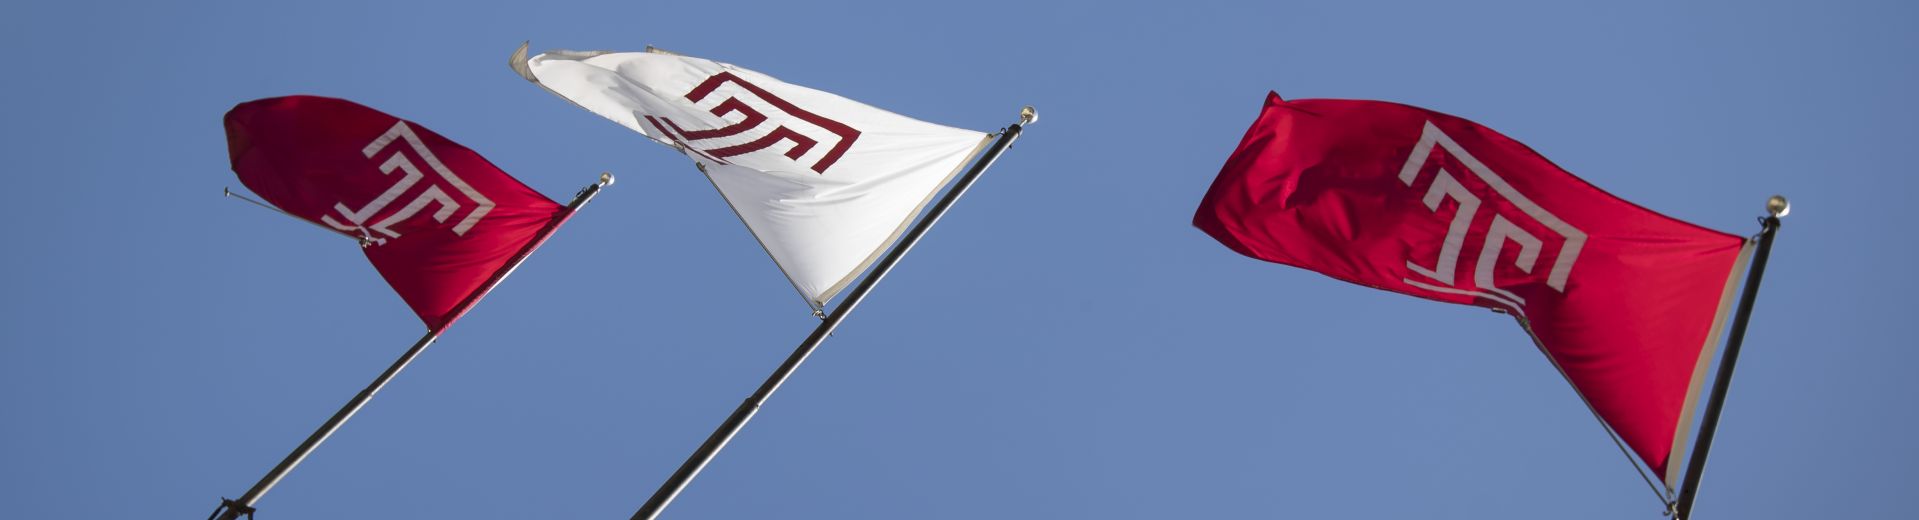 Temple University flags wet against the sky and blowing in the wind